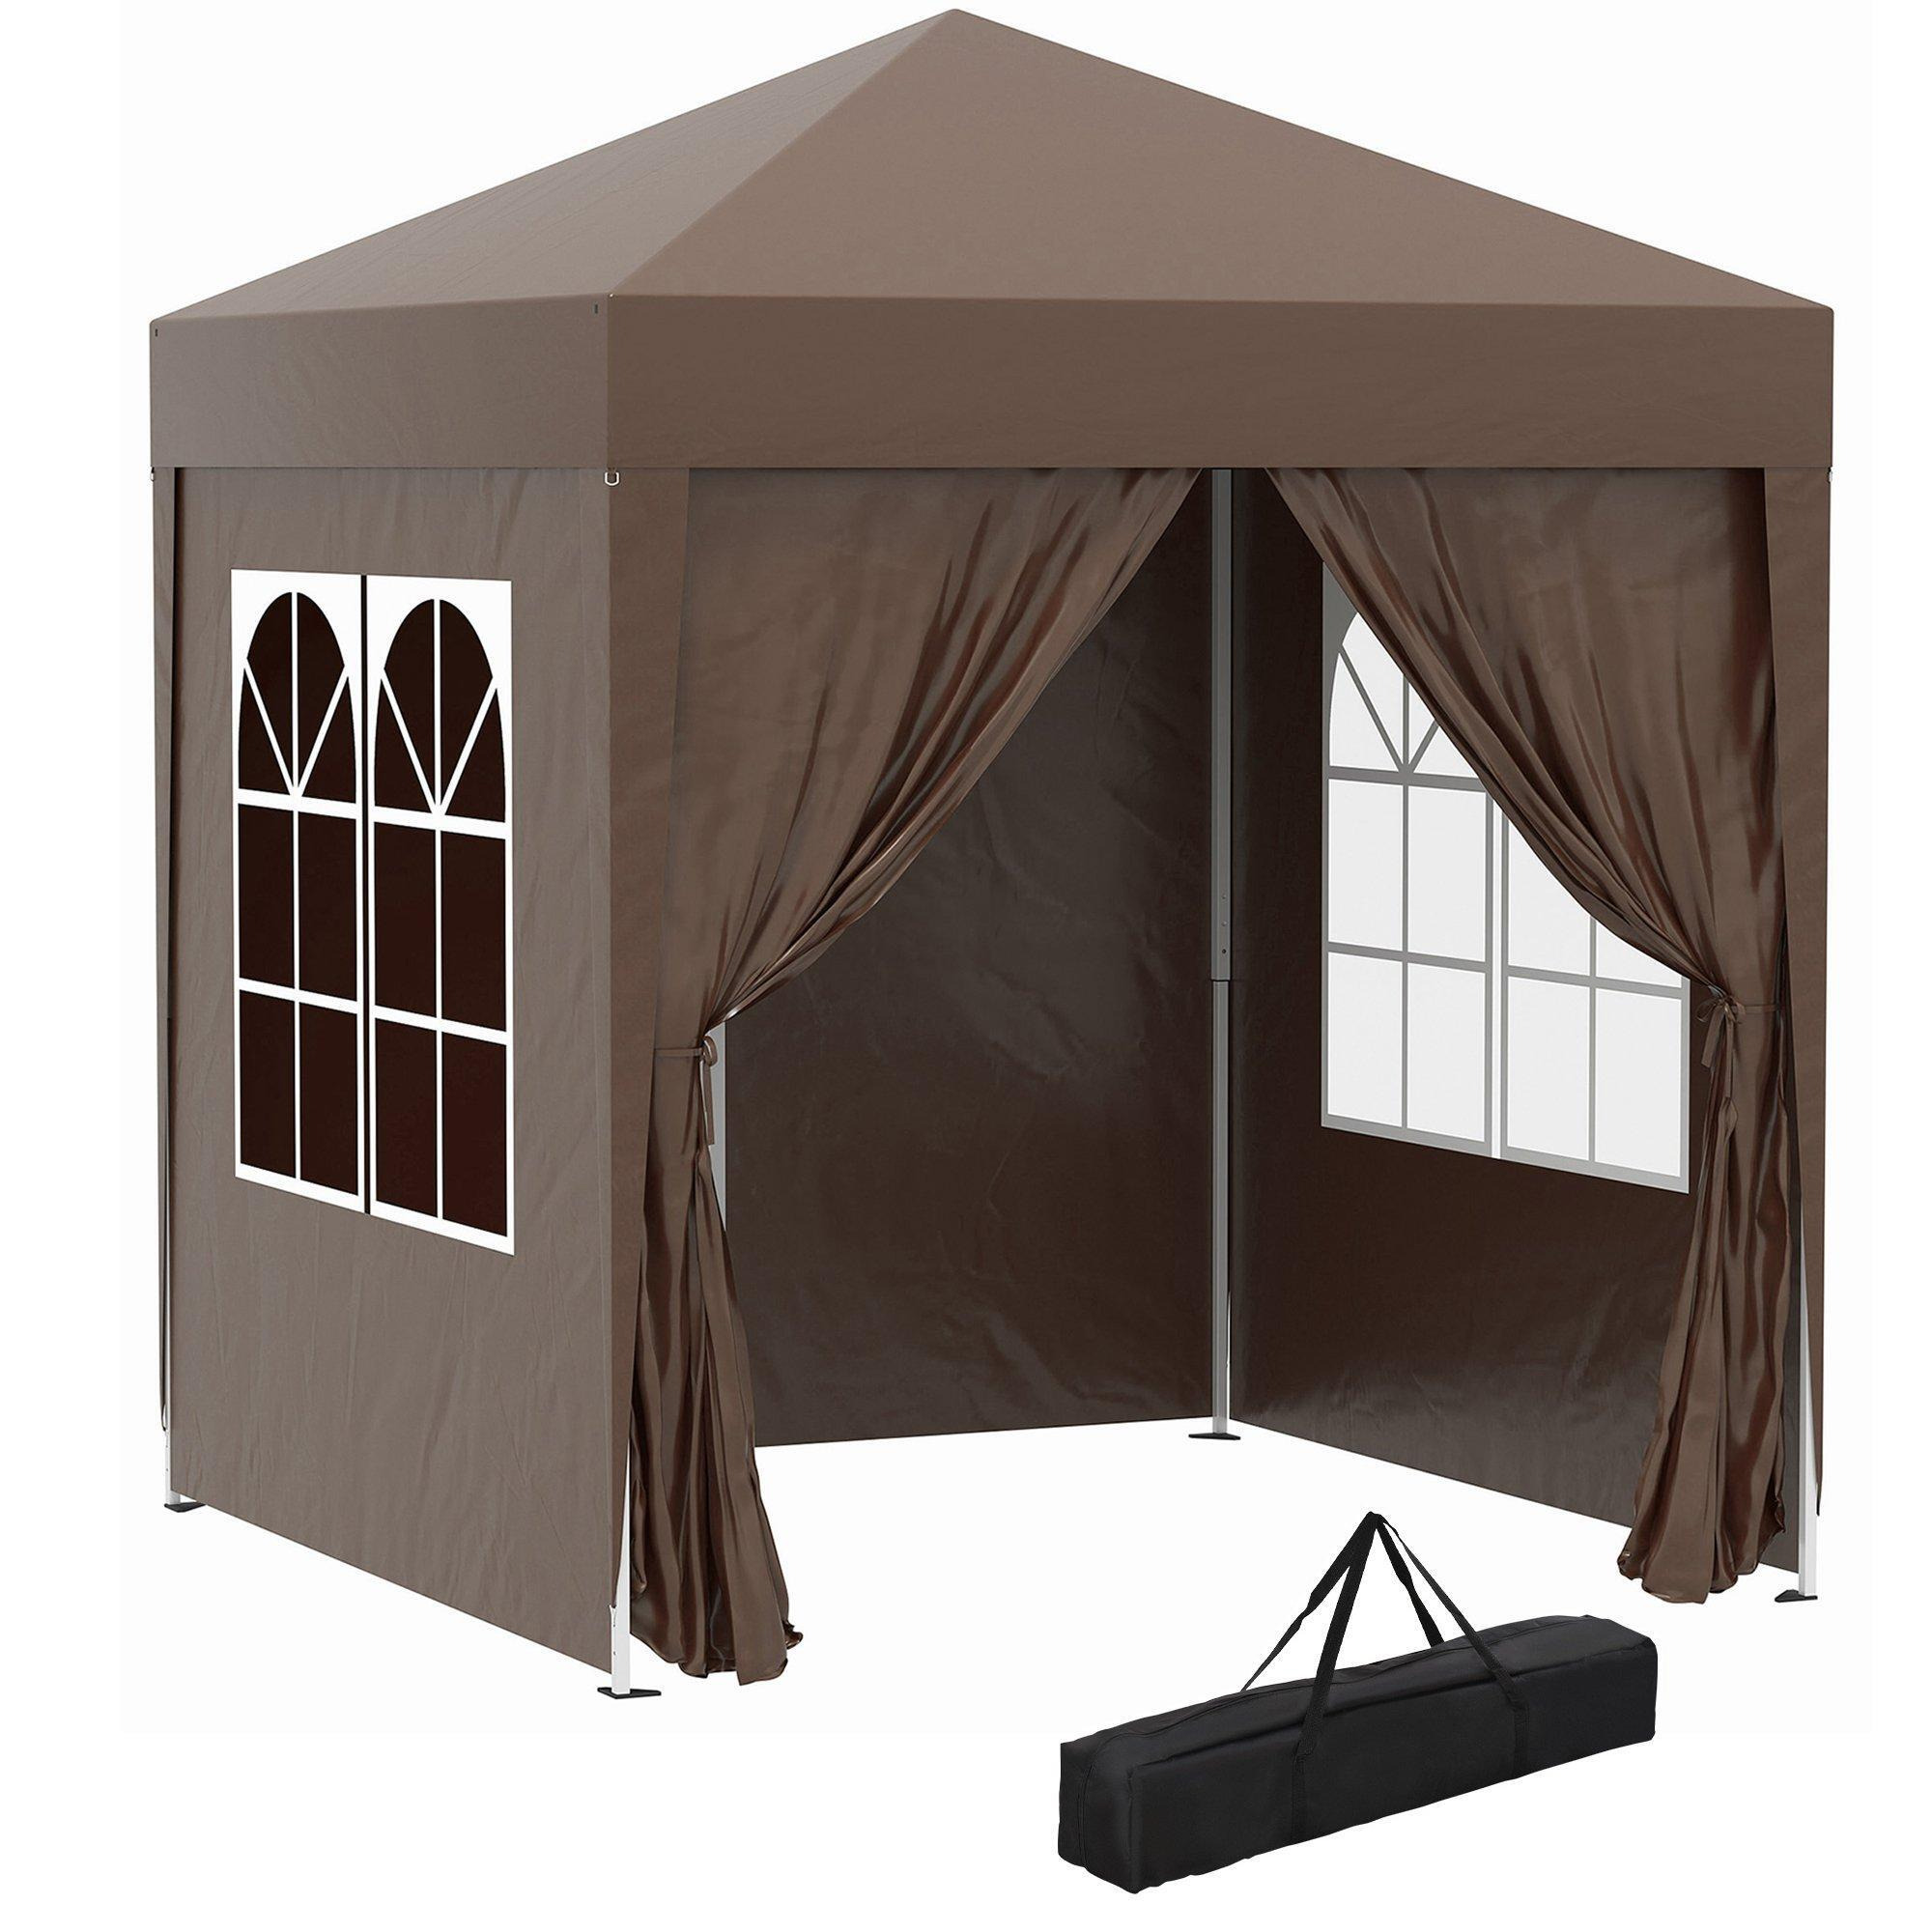 2mx2m Pop Up Gazebo Party Tent Canopy Marquee with Storage Bag - image 1